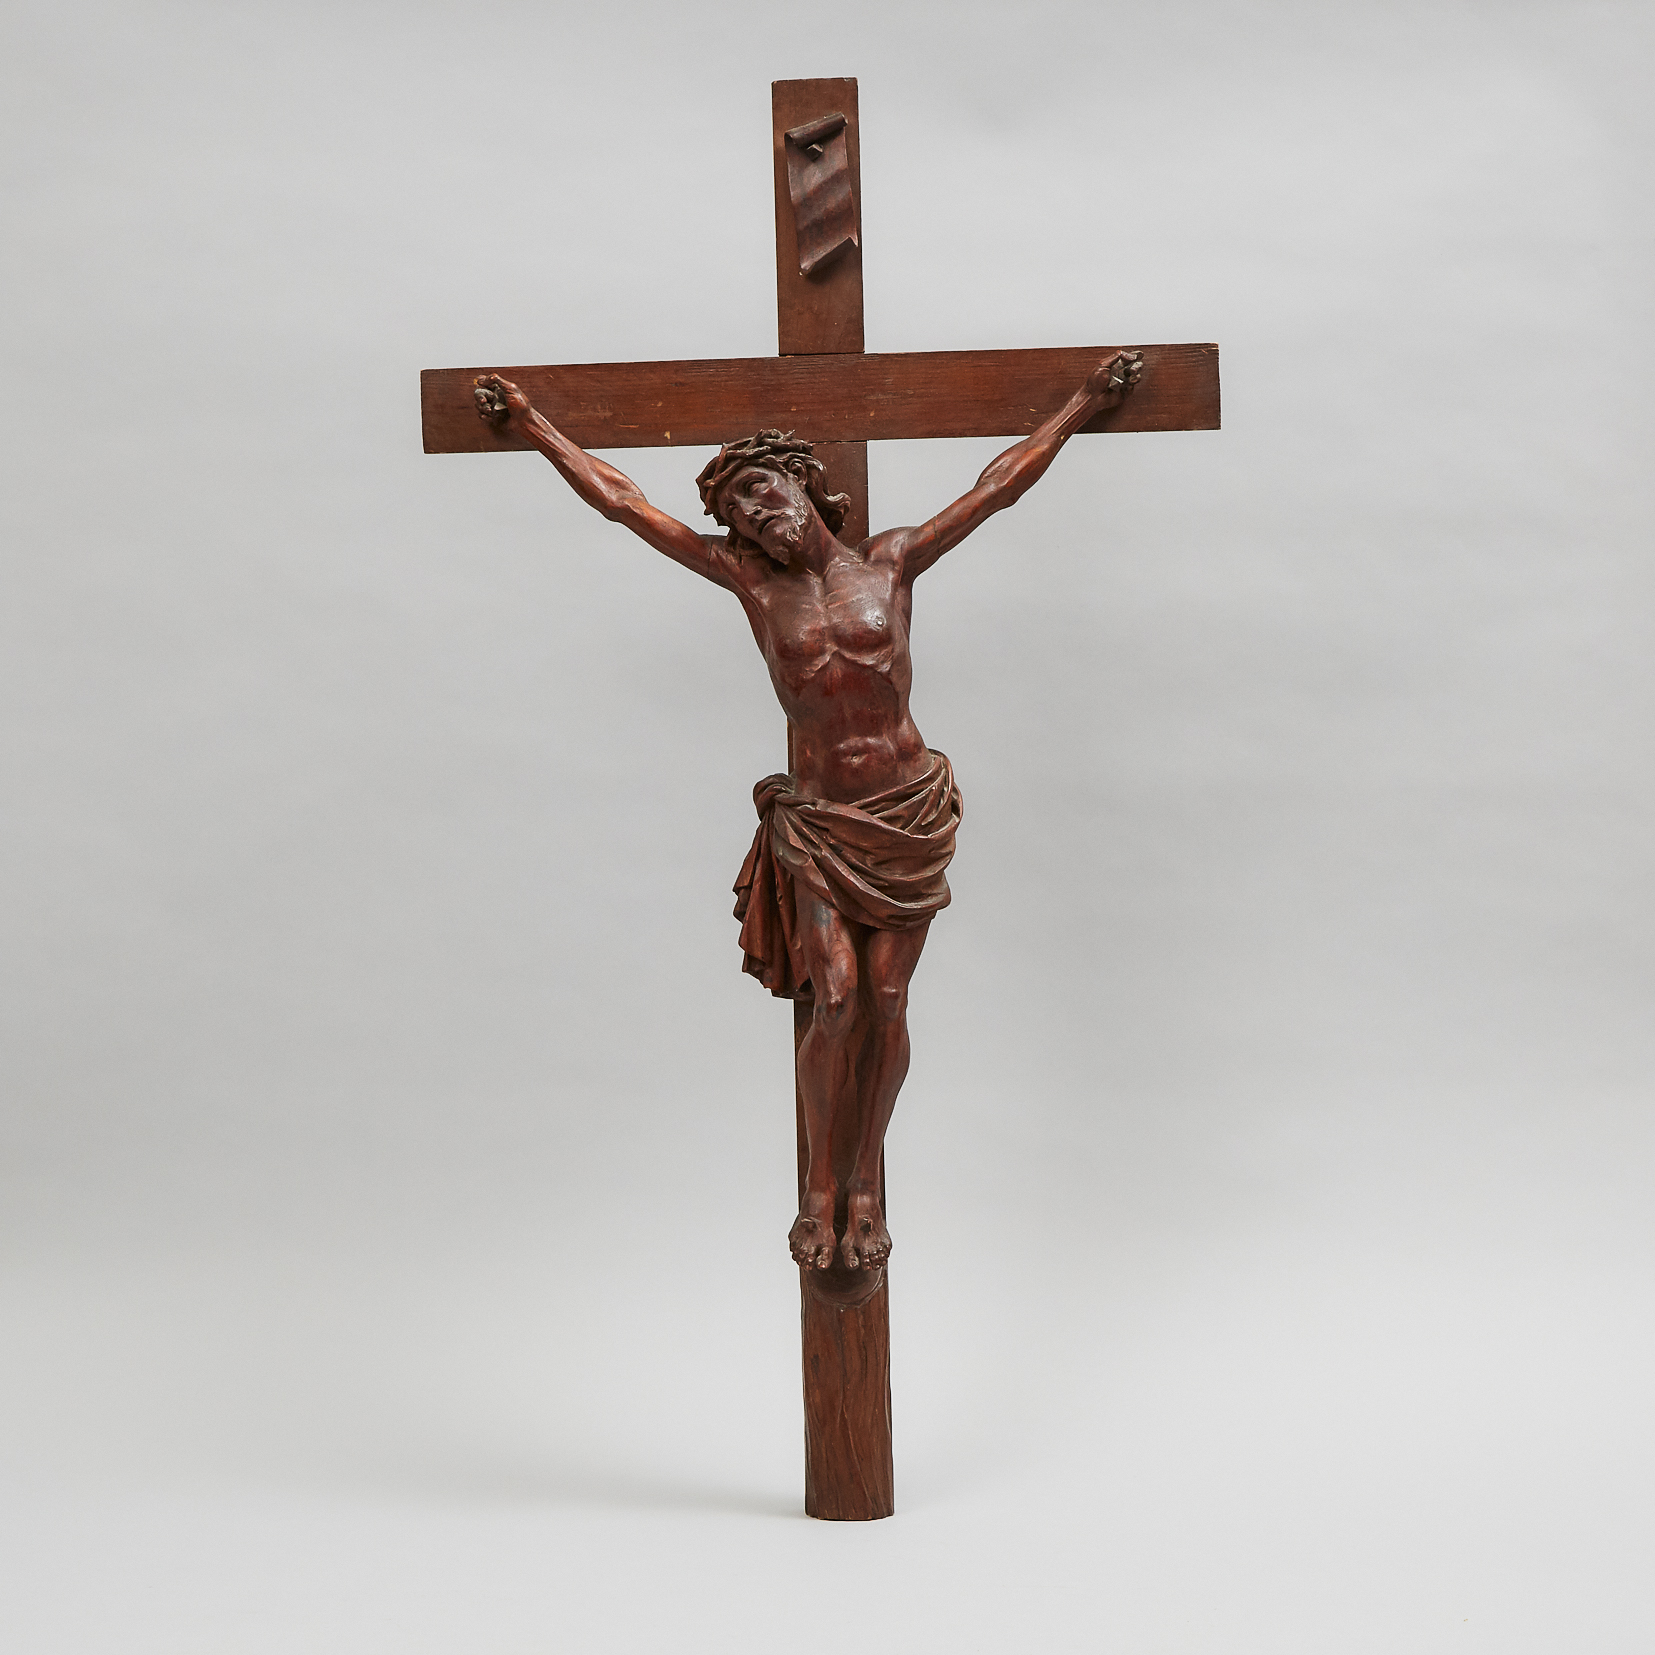 Austrian Carved Wooden Crucifix, 19th/early 20th century